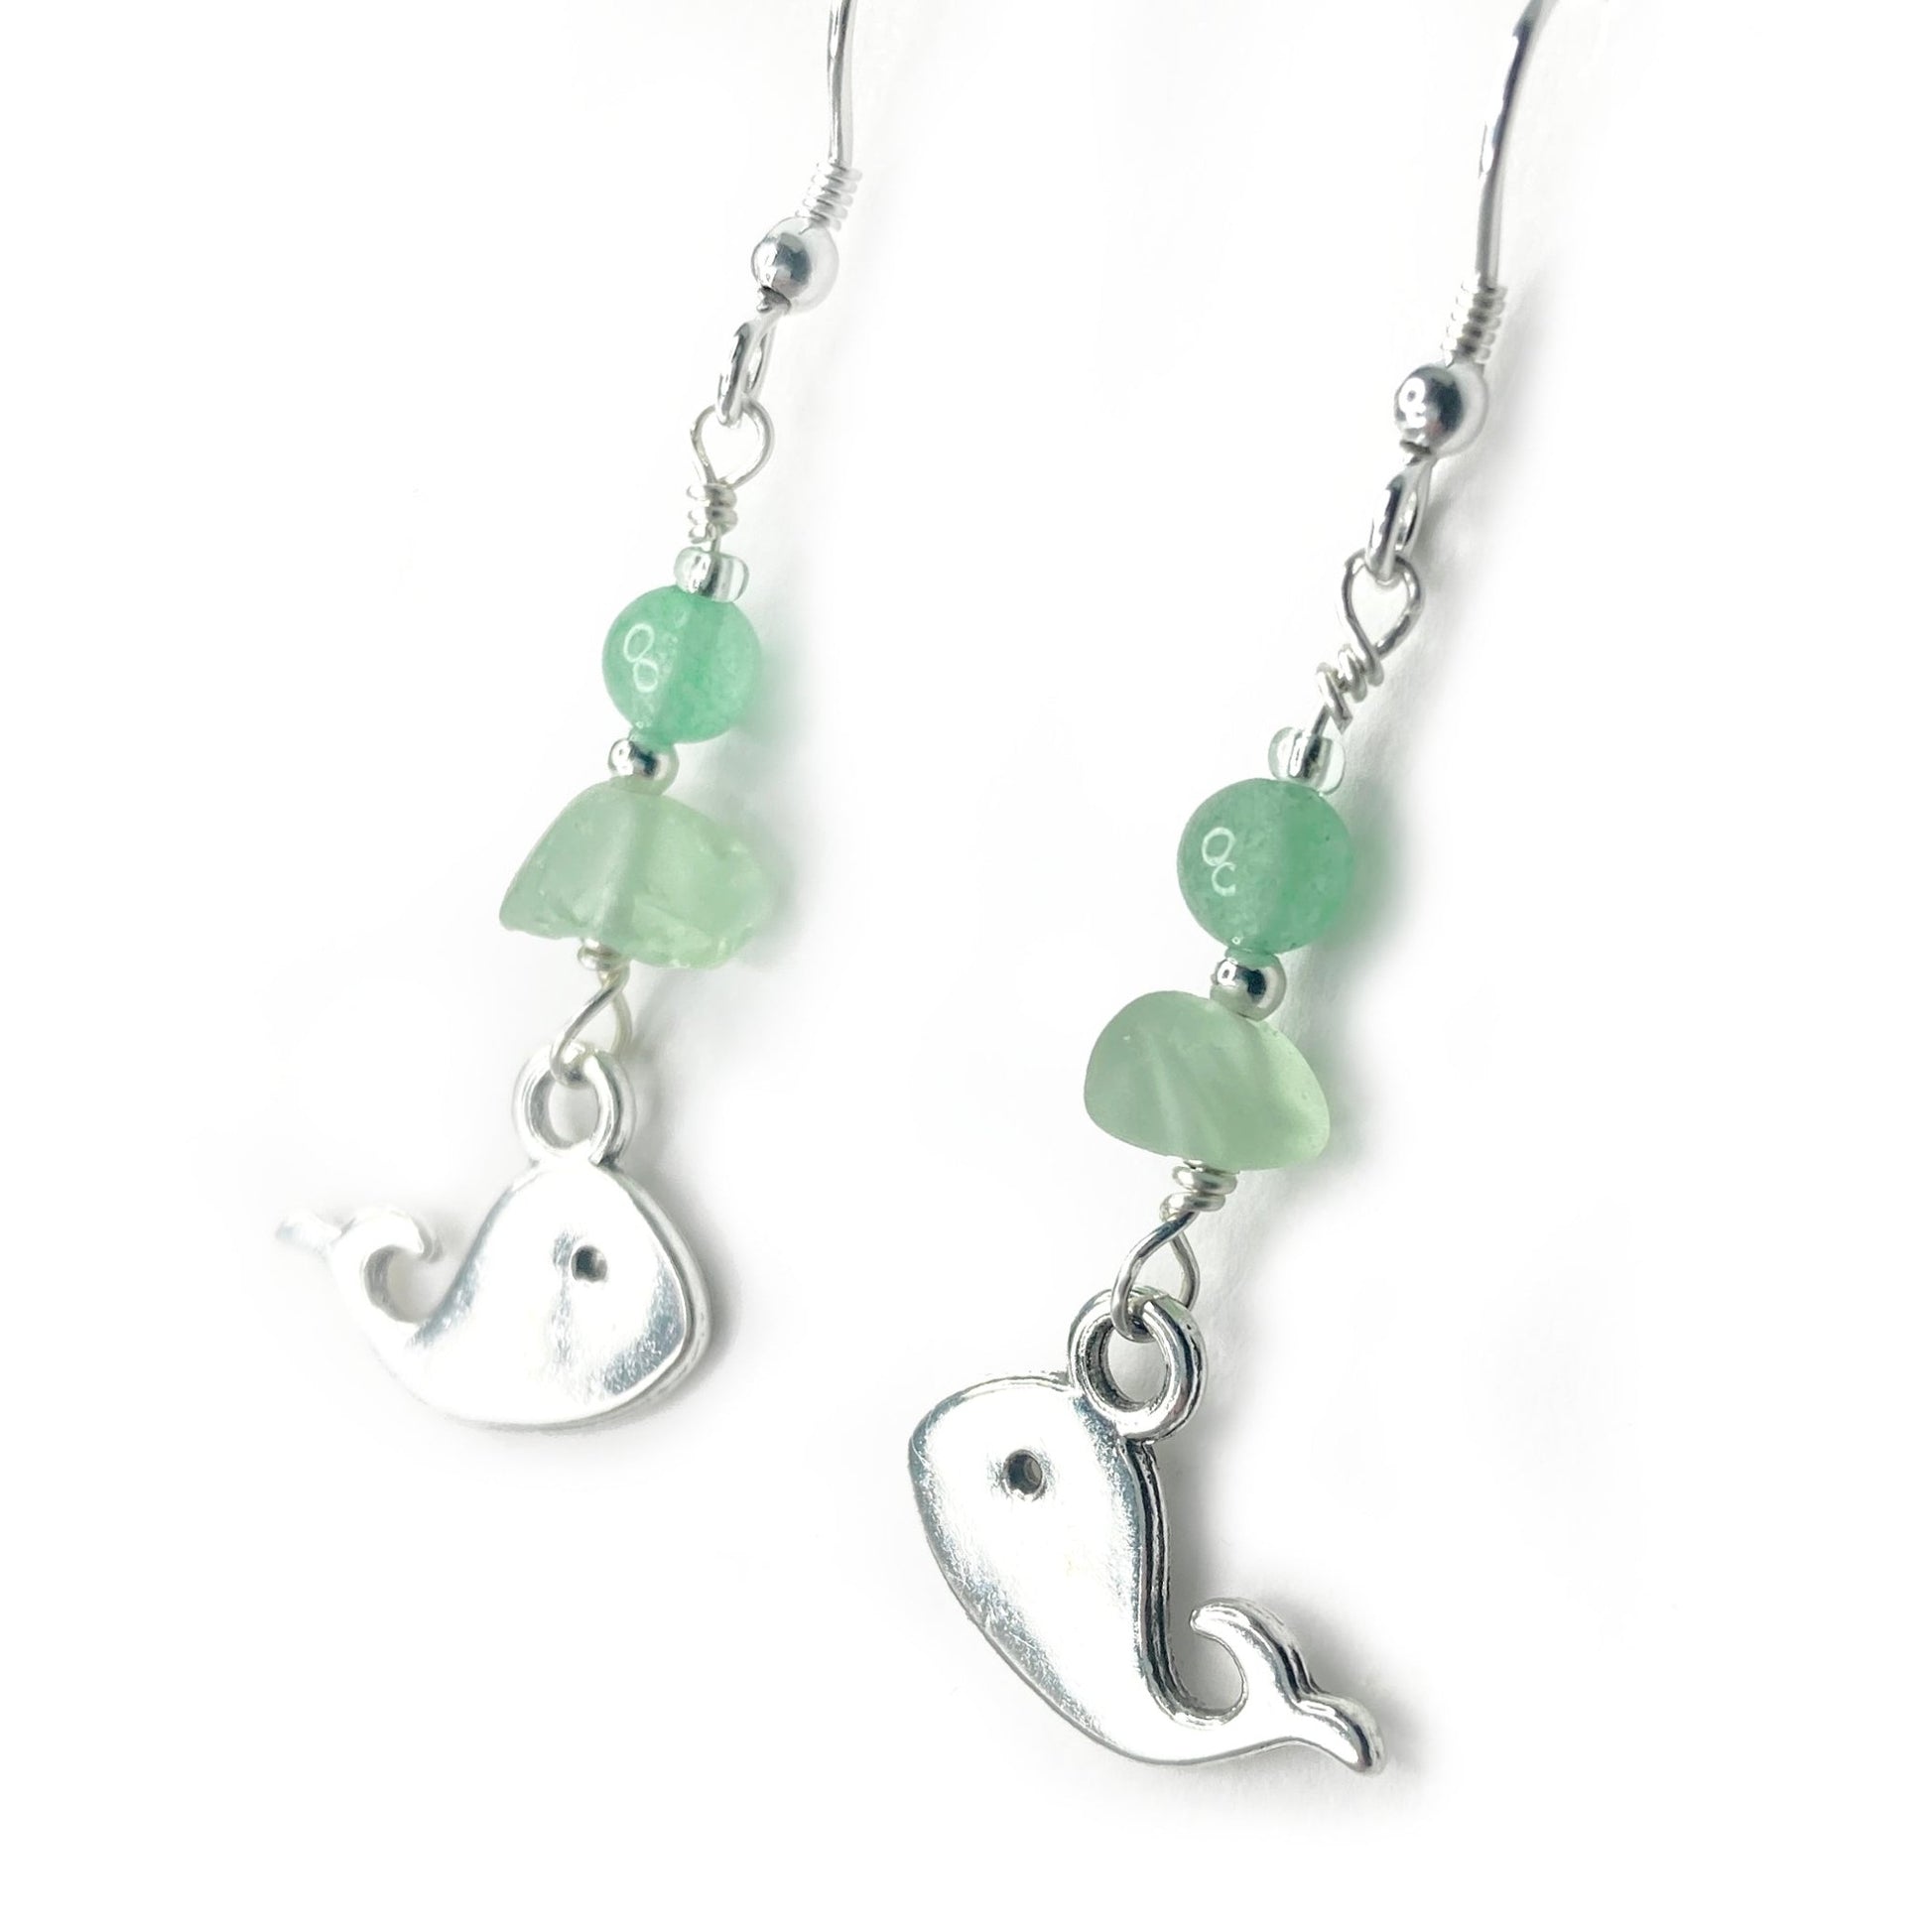 Whale Earrings - Green Sea Glass & Silver Jewellery with Aventurine Crystal Beads - East Neuk Beach Crafts